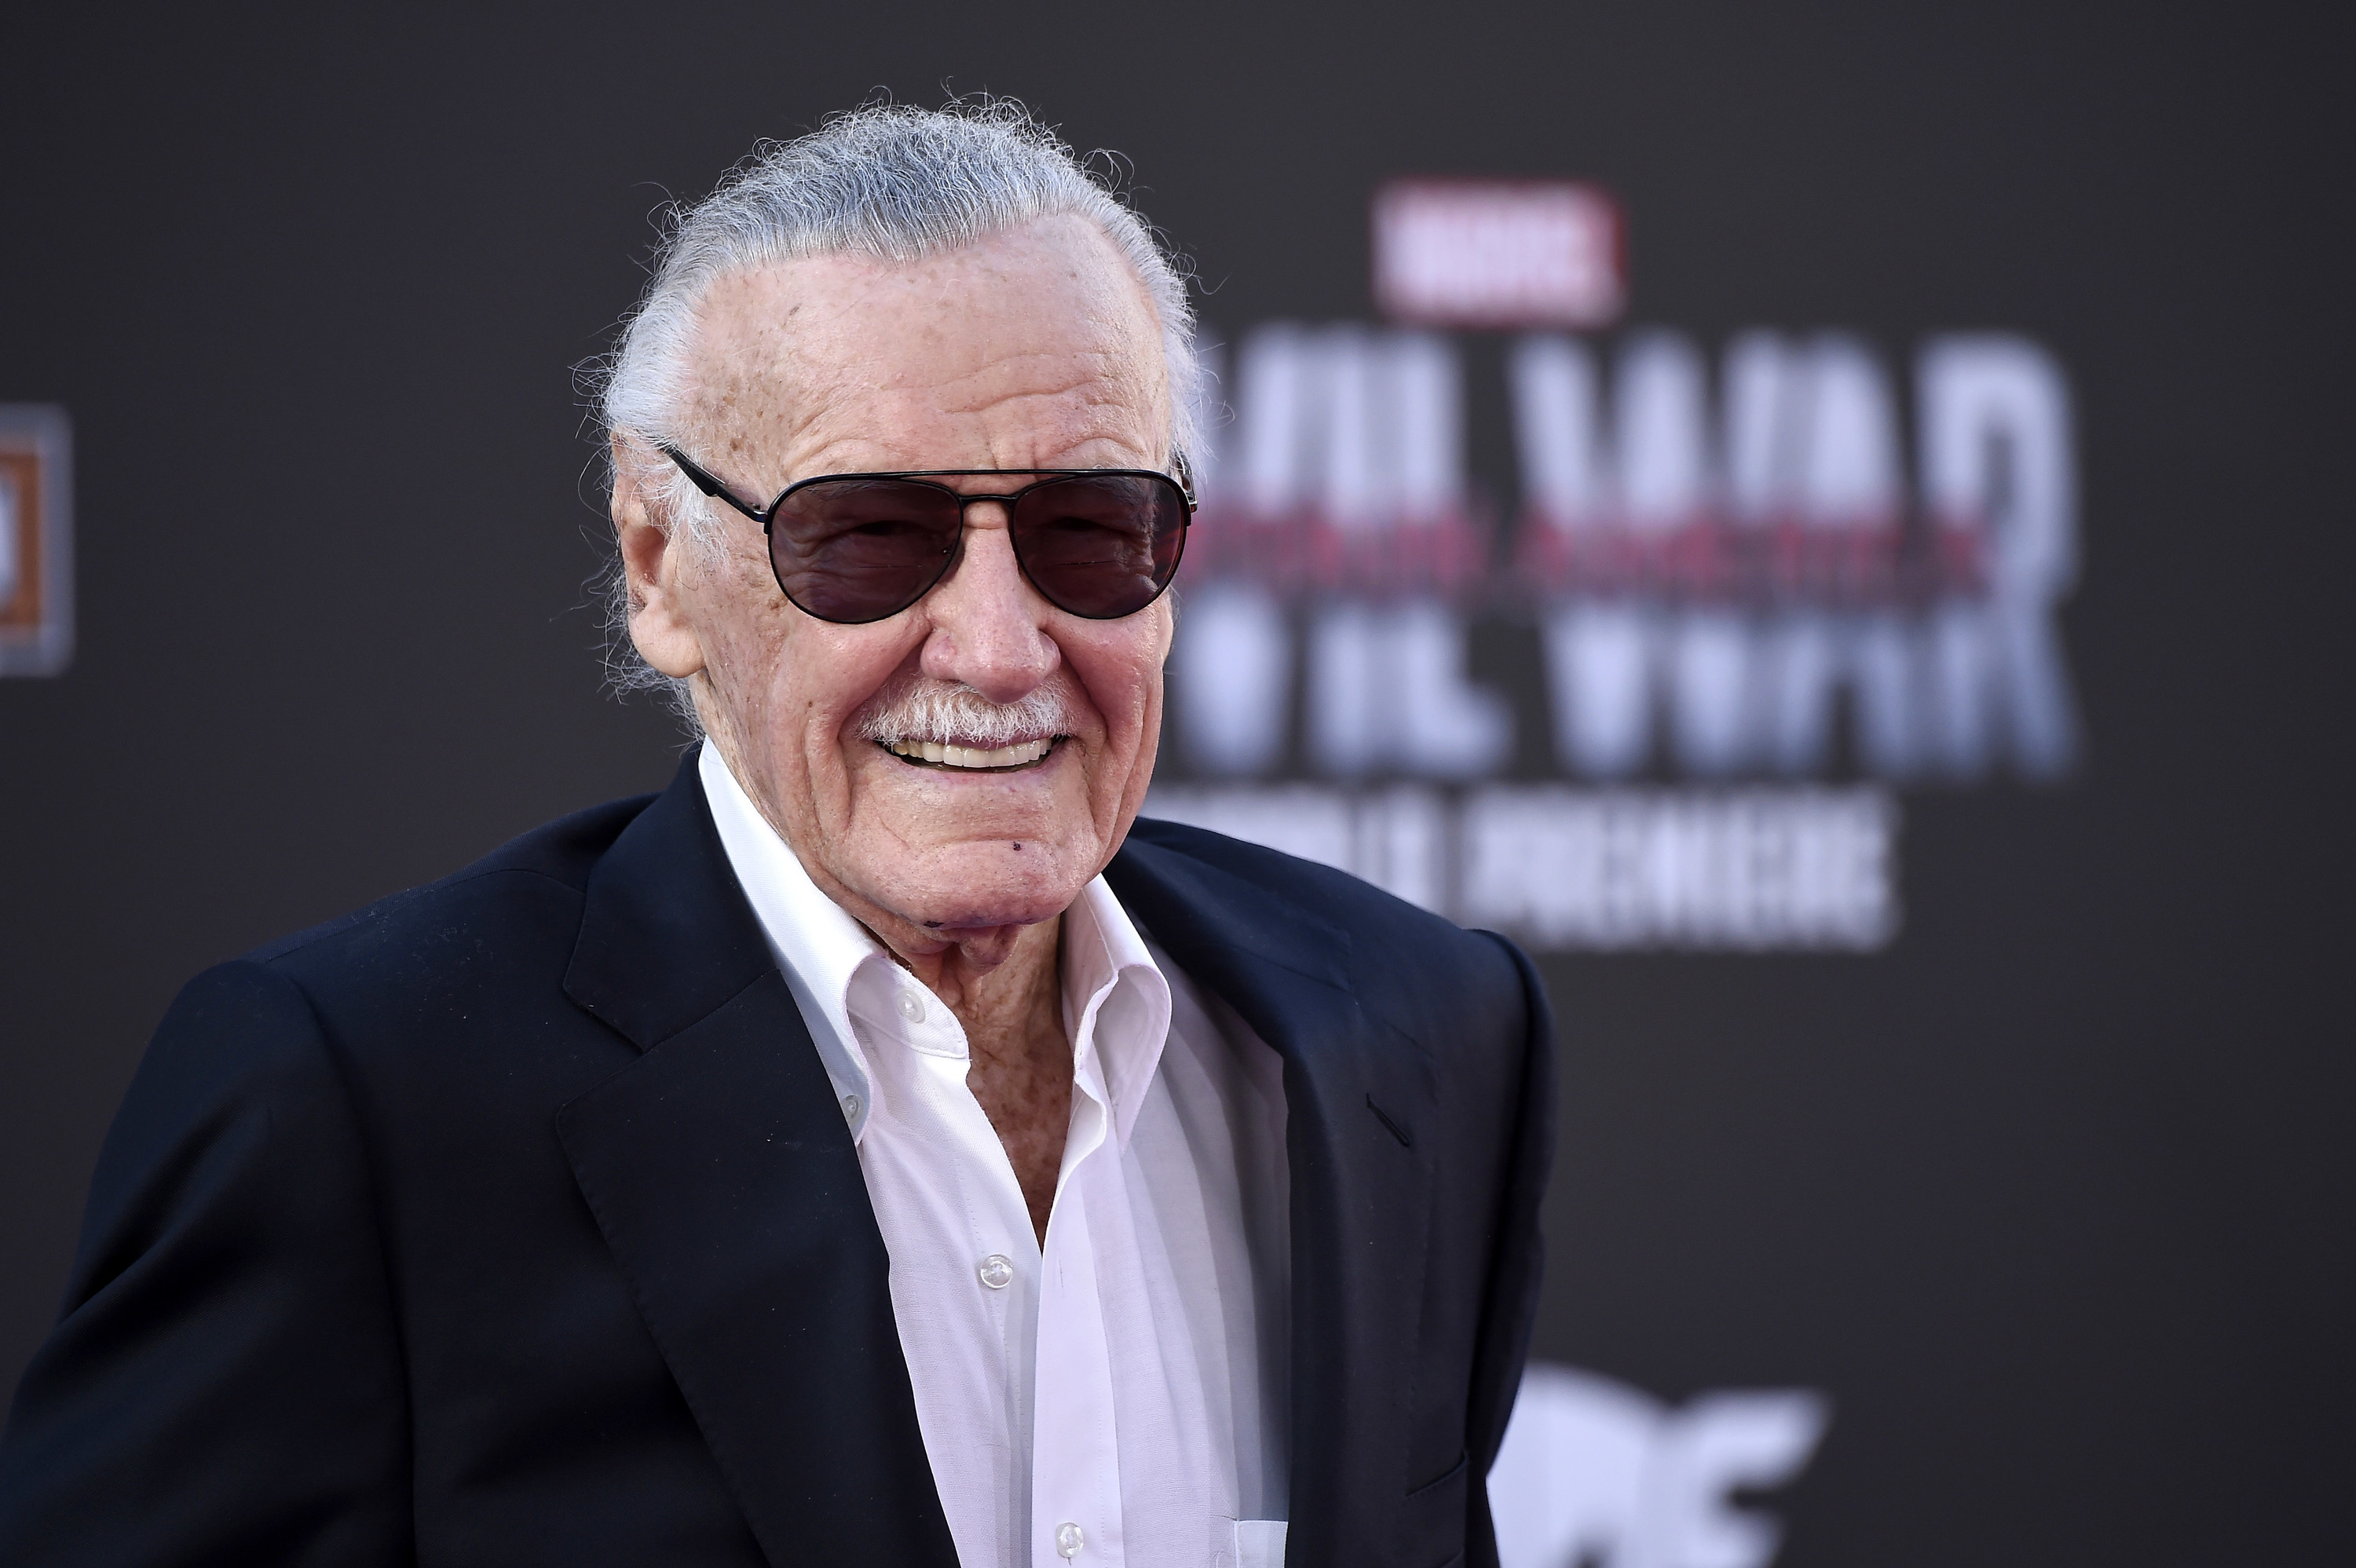 Stan is smiling at the Captain America: Civil War premiere, wearing a black blazer, white shirt and sunglasses